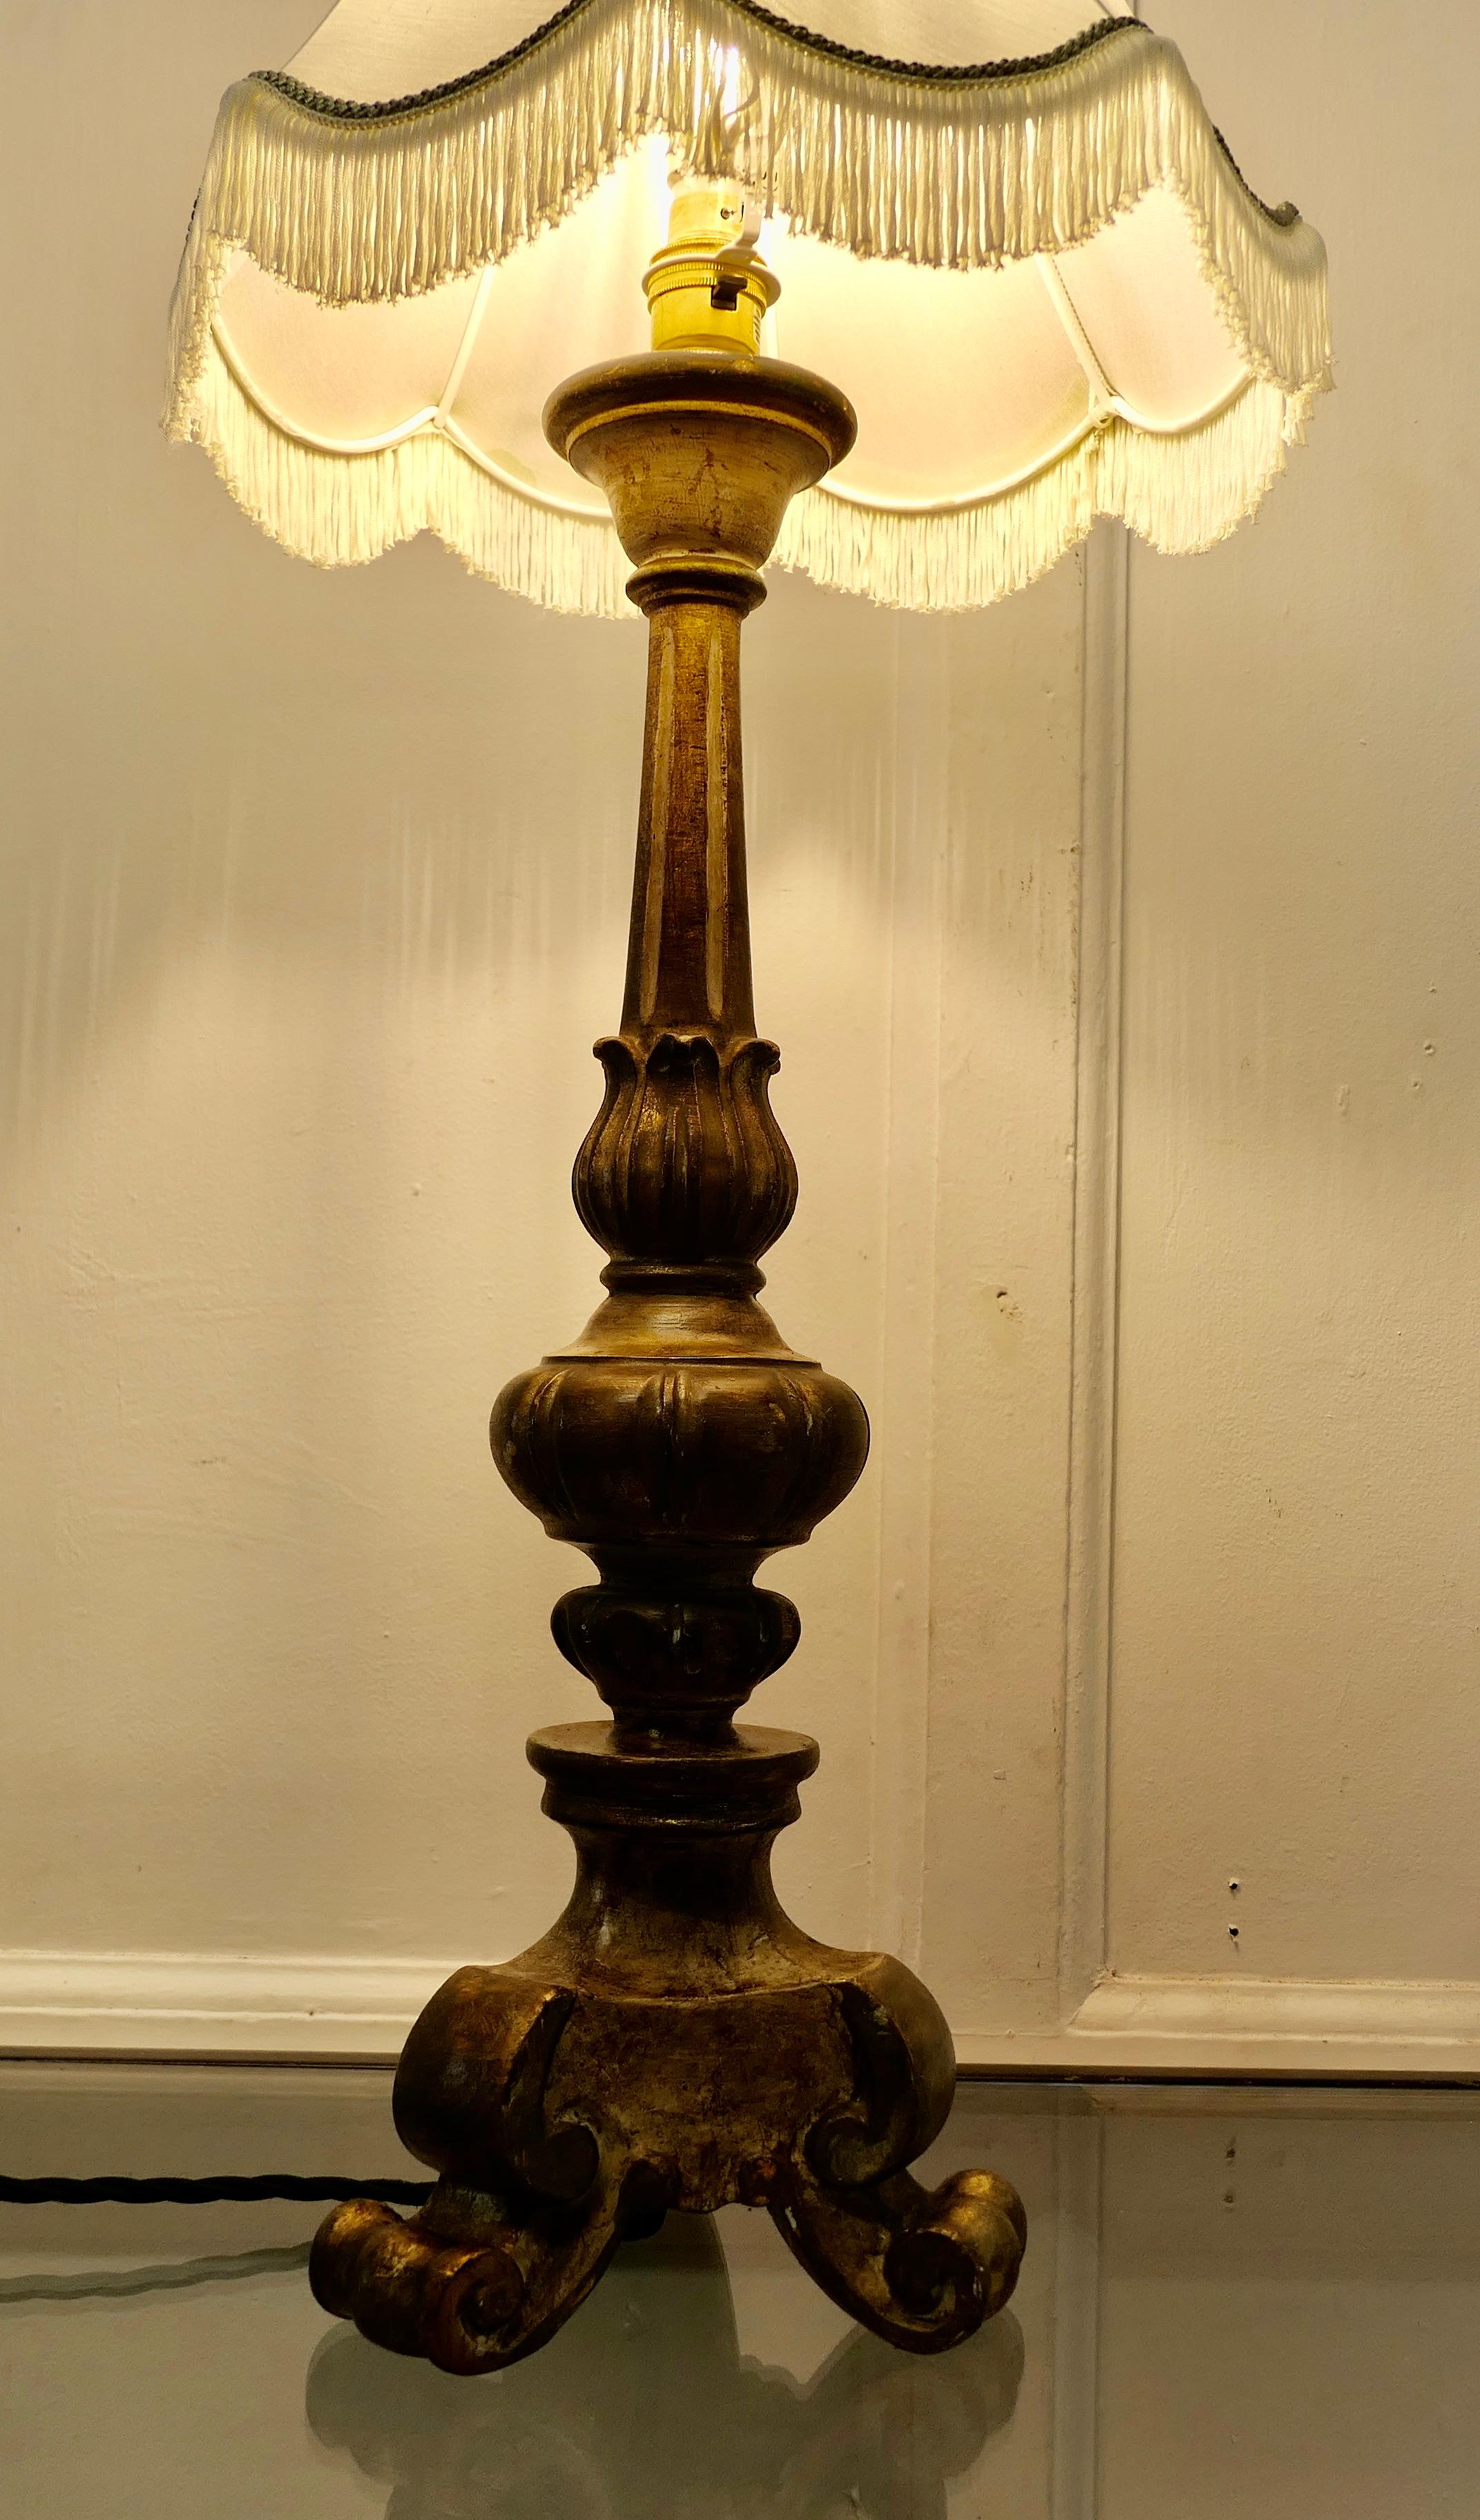 Pine Carved Wooden Shabby Gilt Table Lamp  This is a great statement piece  For Sale